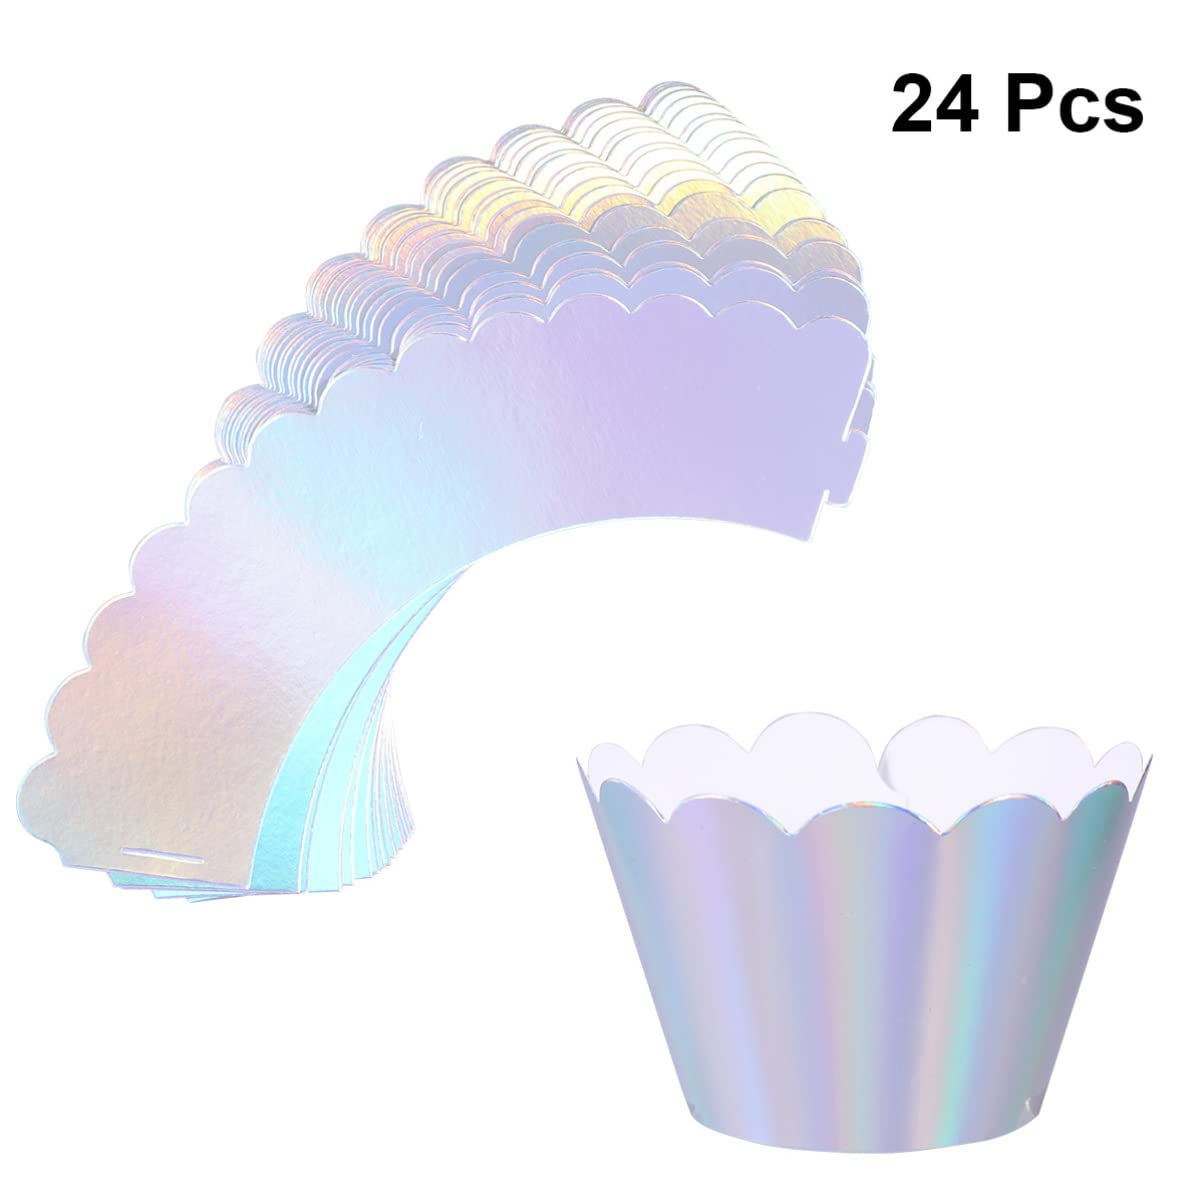 Abaodam 48 Pcs Rainbow Cupcake Liners Cupcake Wrappers Holders Muffin Liners Baking Cups for Wedding Birthday Baby Showers Decoration